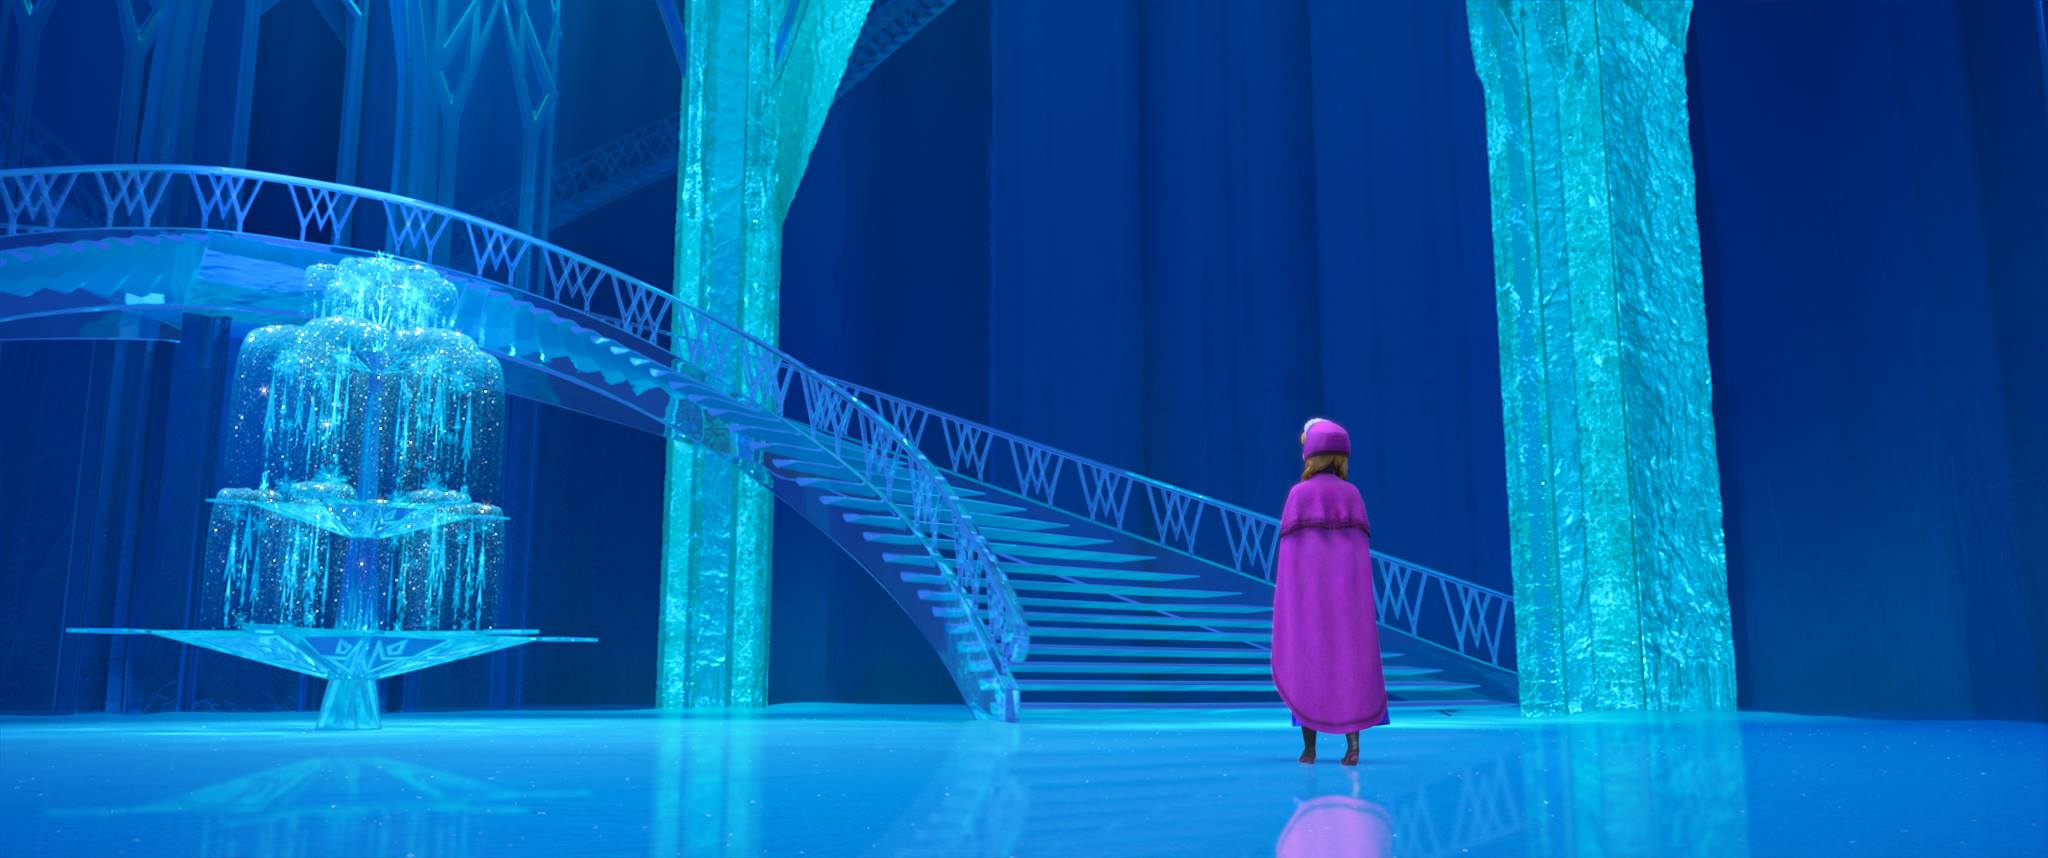 New Frozen Images Show Off Elsa S Ice Palace Arendelle